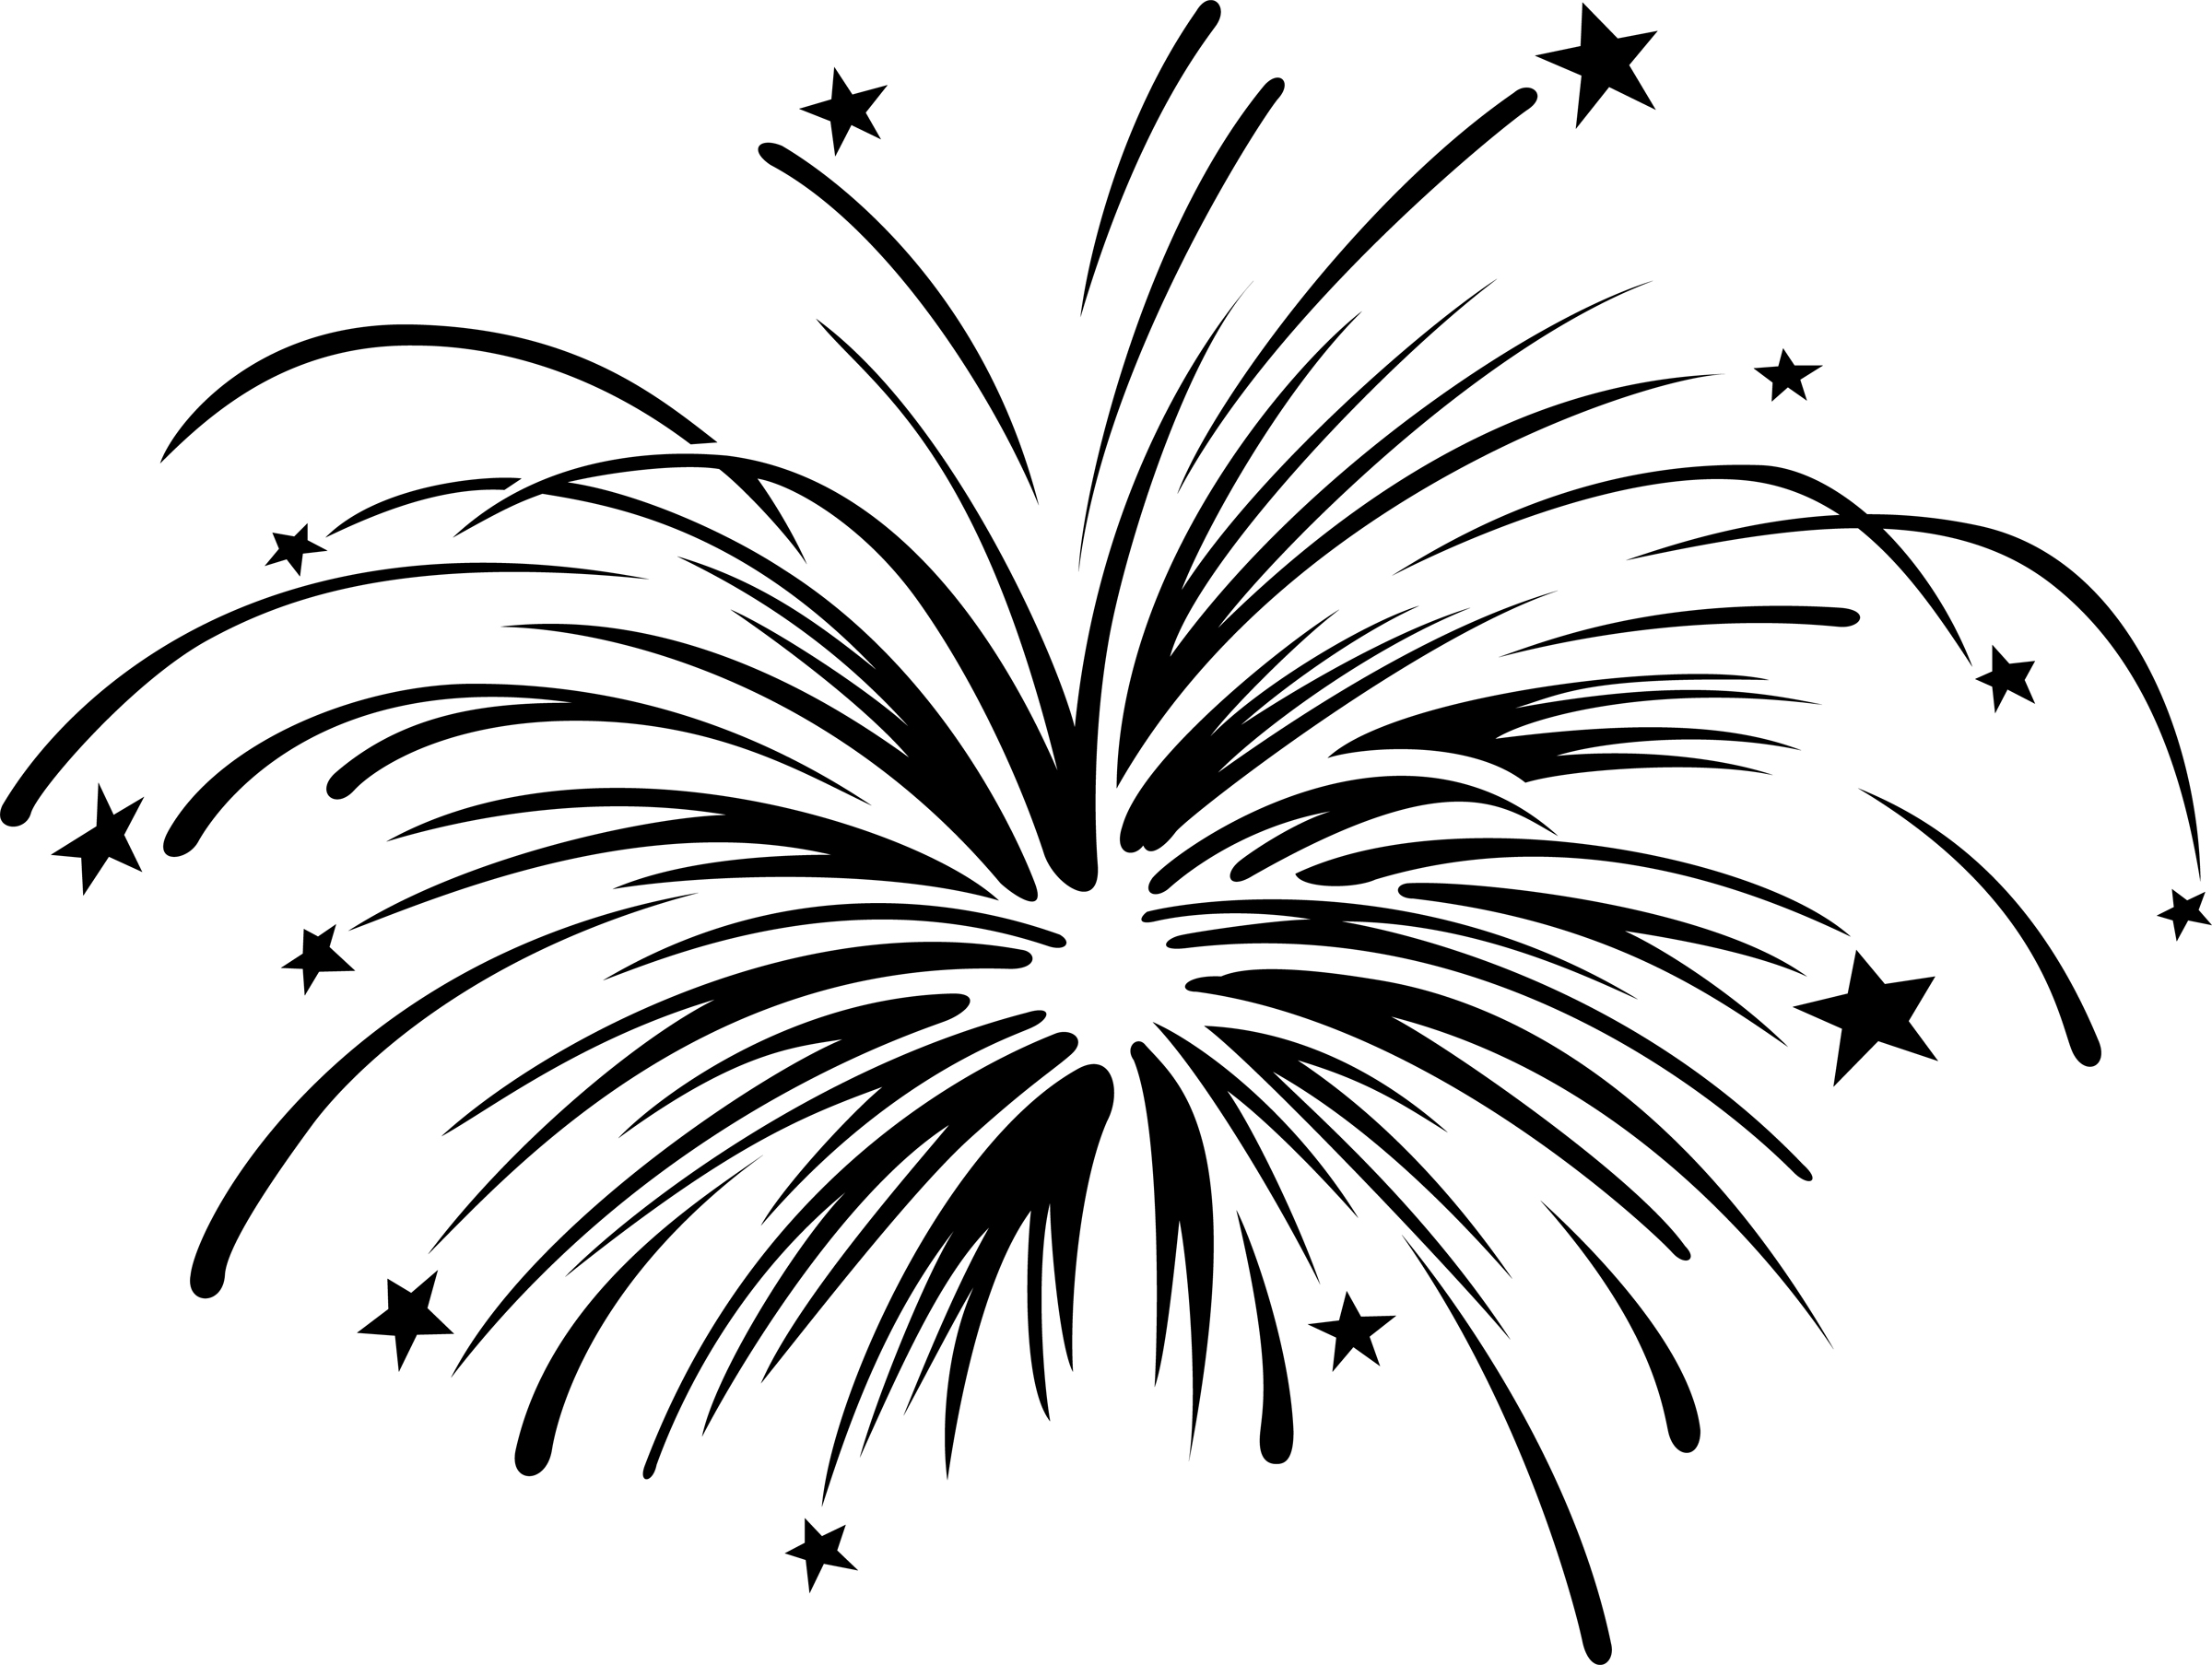 Fireworks clipart black and white free clipart